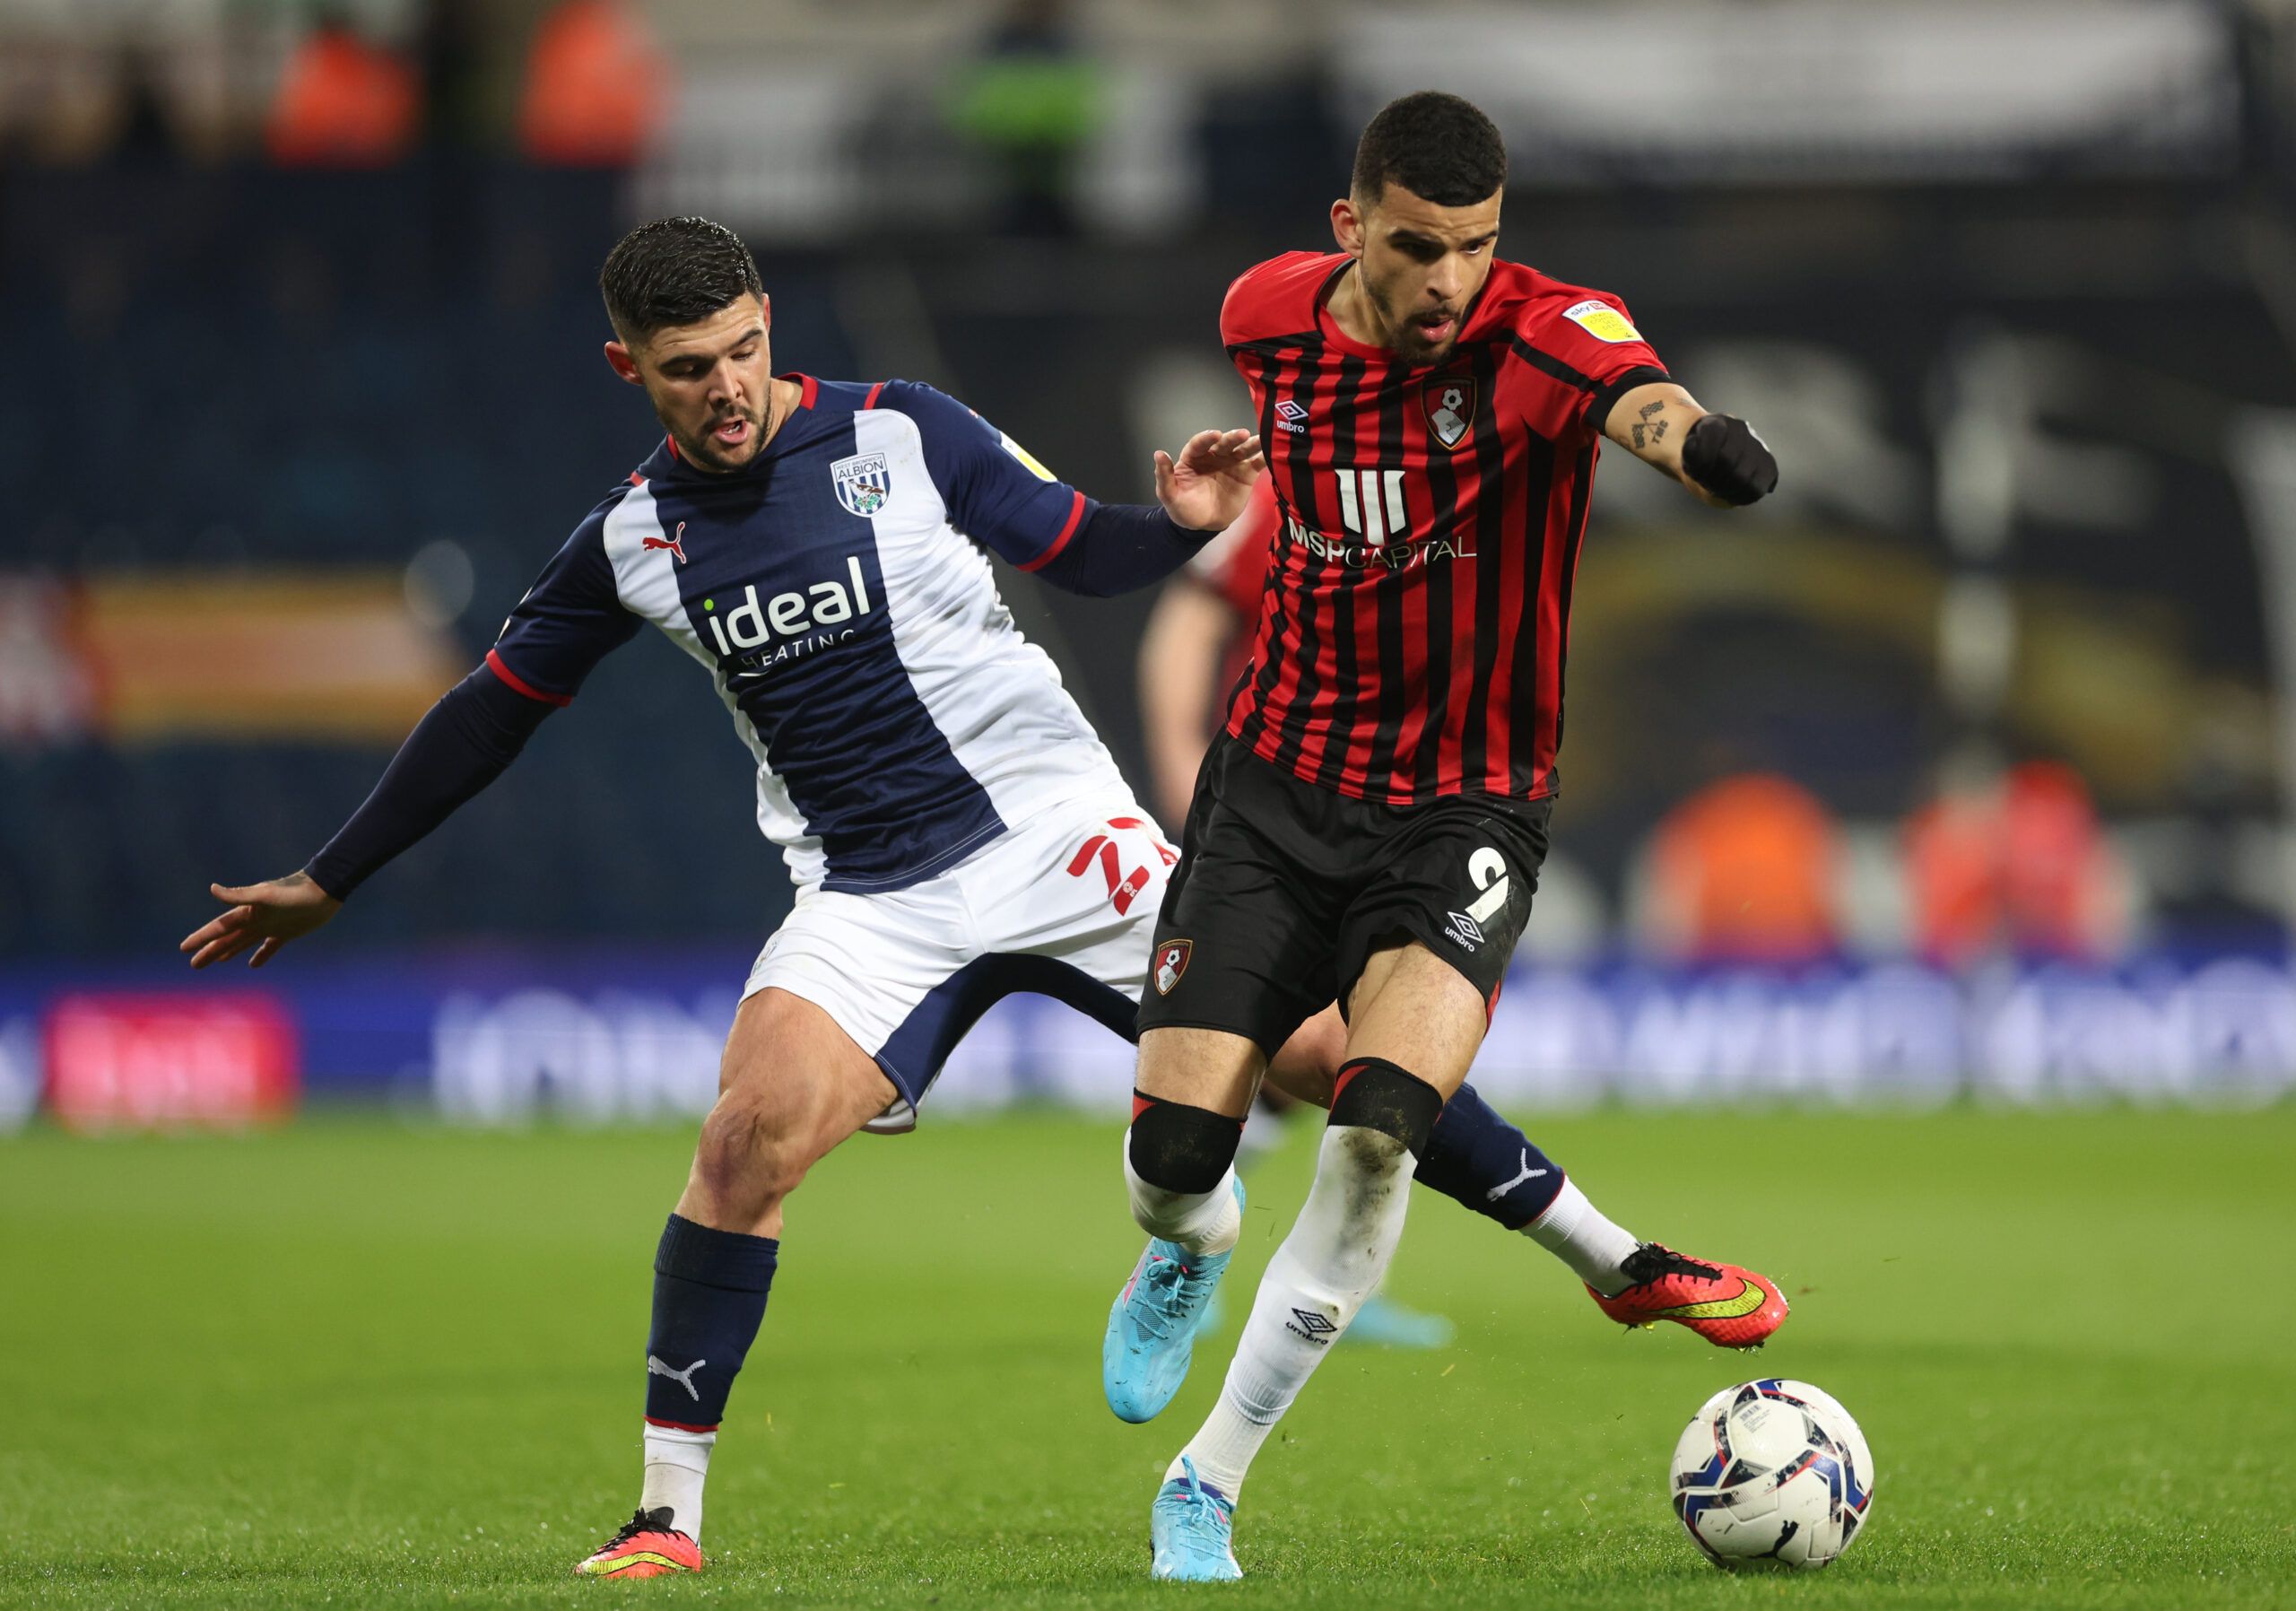 Soccer Football - Championship - West Bromwich Albion v AFC Bournemouth - The Hawthorns, West Bromwich, Britain - April 6, 2022 West Bromwich Albion's Alex Mowatt in action with AFC Bournemouth's Dominic Solanke Action Images/Carl Recine EDITORIAL USE ONLY. No use with unauthorized audio, video, data, fixture lists, club/league logos or 'live' services. Online in-match use limited to 75 images, no video emulation. No use in betting, games or single club /league/player publications.  Please conta